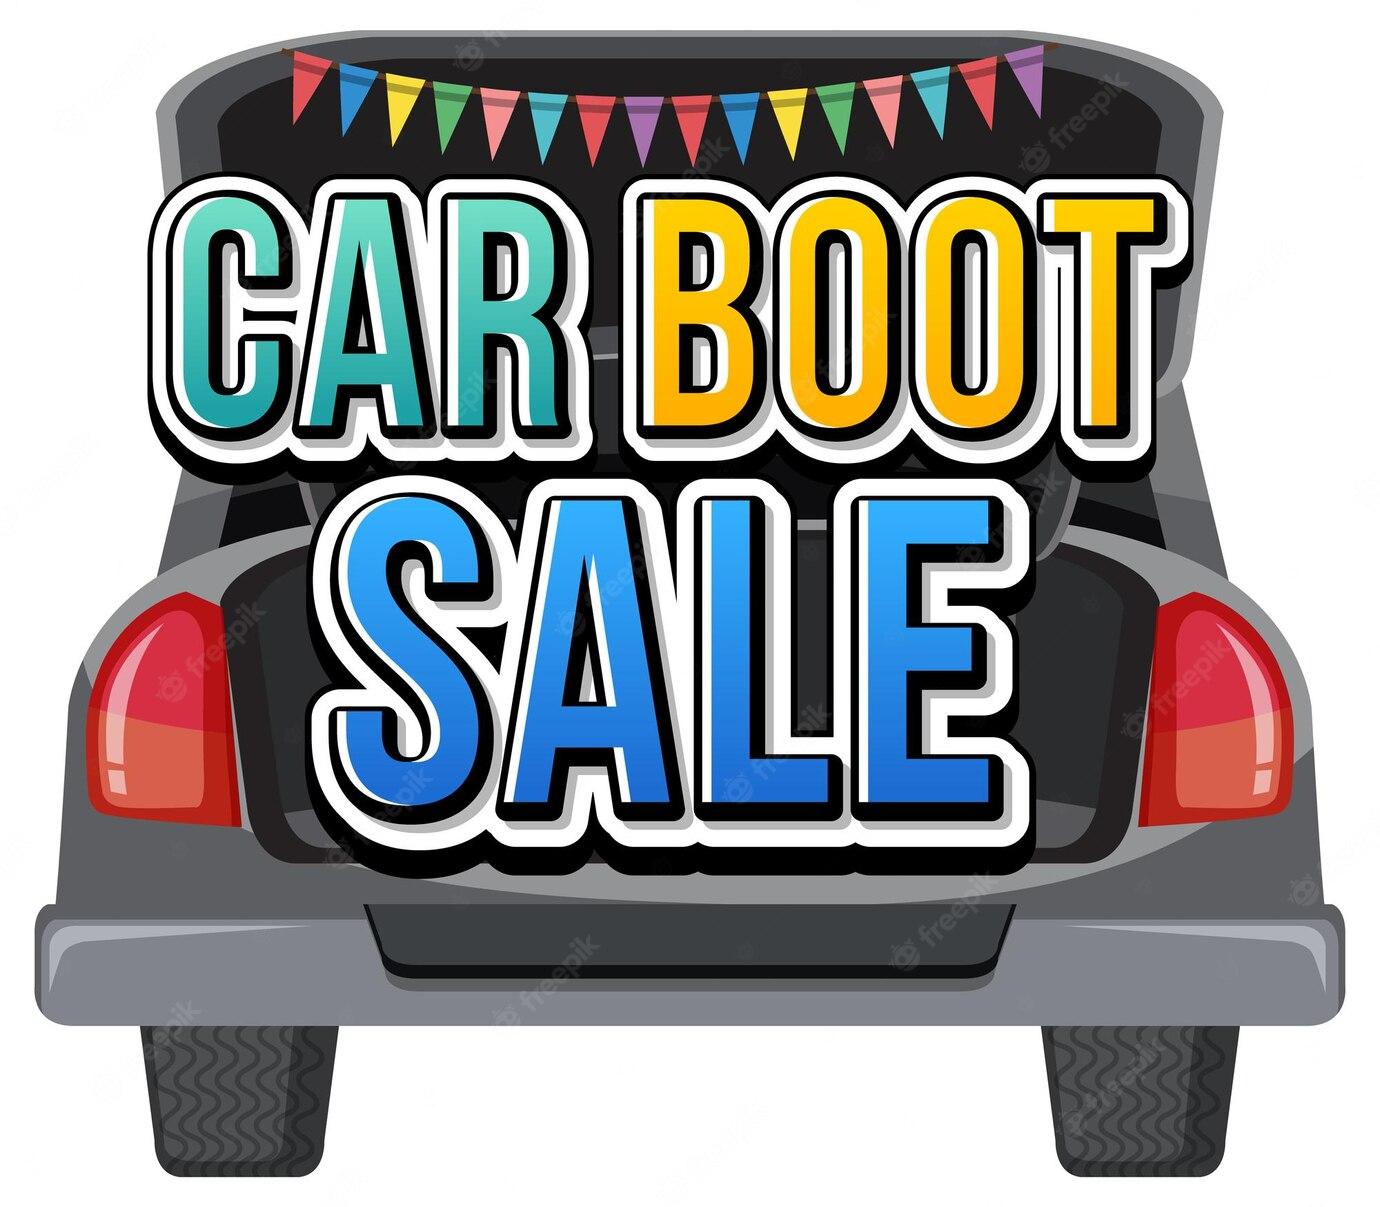 Don't miss the May Bank Holiday Car Boot Sale! Book early to avoid dissapointment!